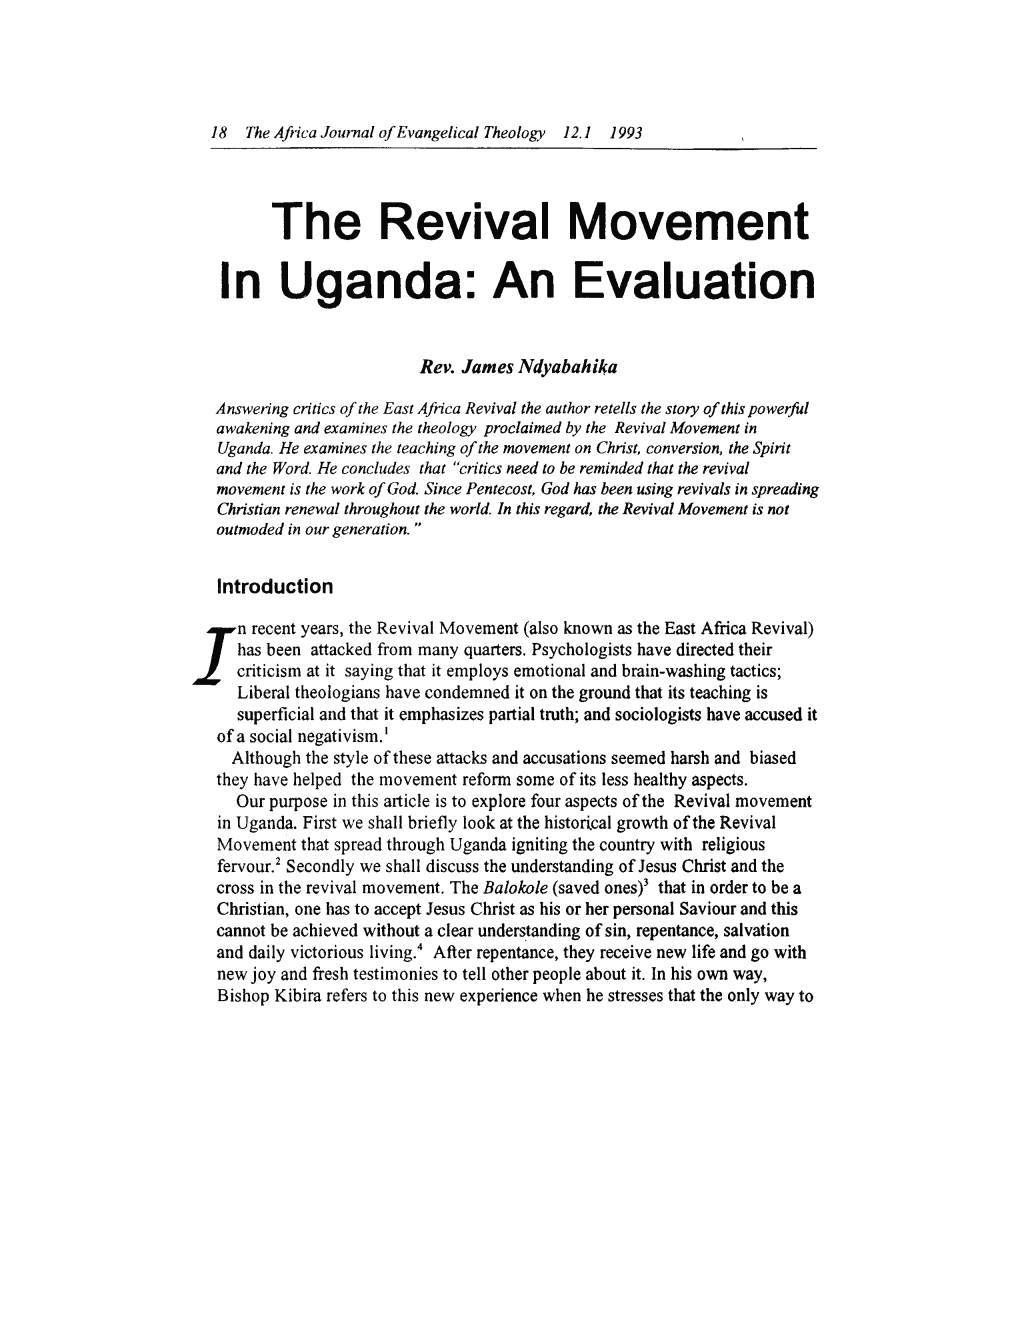 The Revival Movement in Uganda: an Evaluation